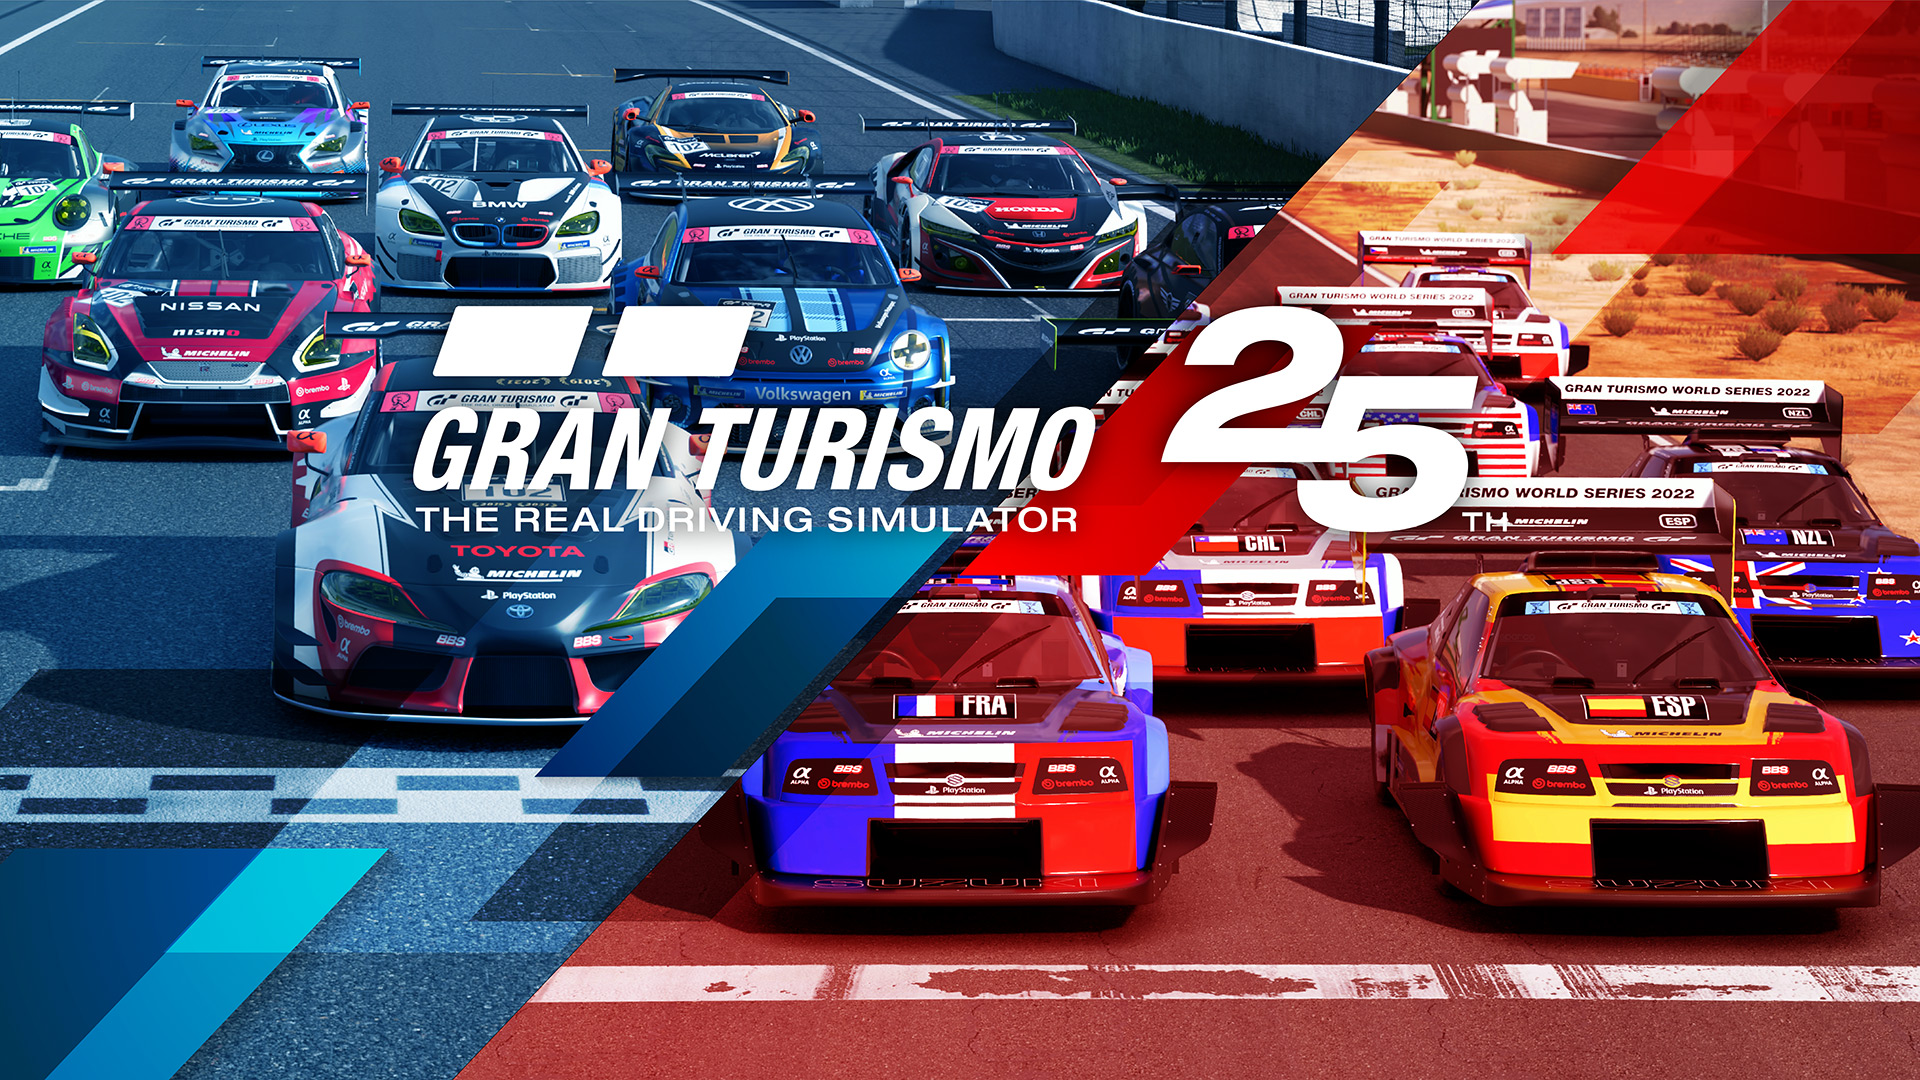 25 Playstation 2 Presents The Gran Turismo 4 Awards Photos & High Res  Pictures - Getty Images